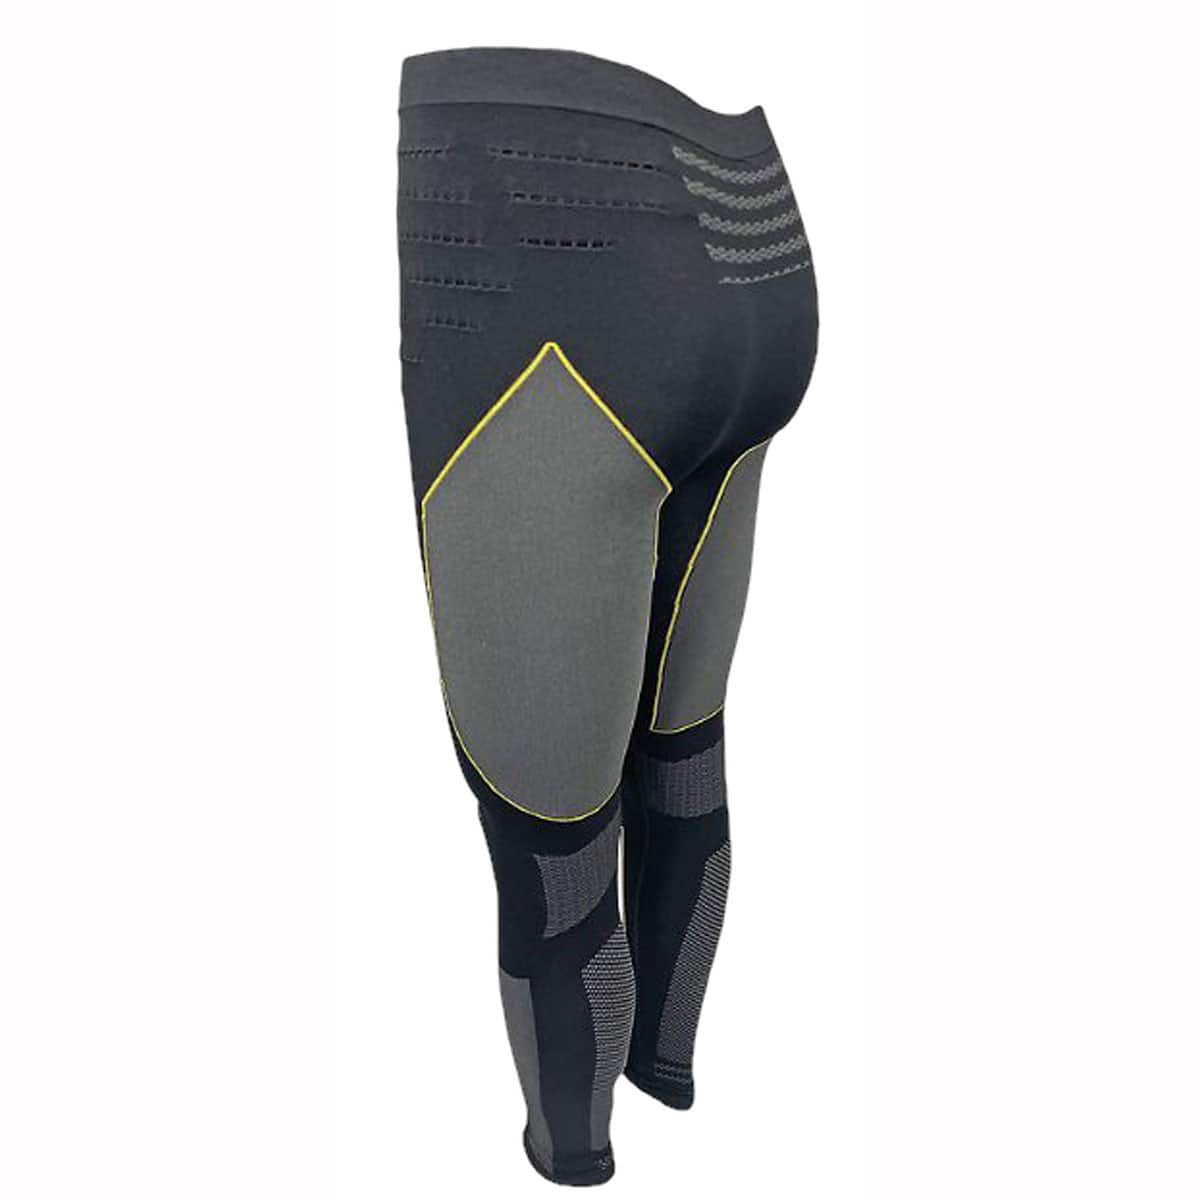 Forcefield Tech 3 Base Layer 2 Pants: A technically superior motorcycle base layer